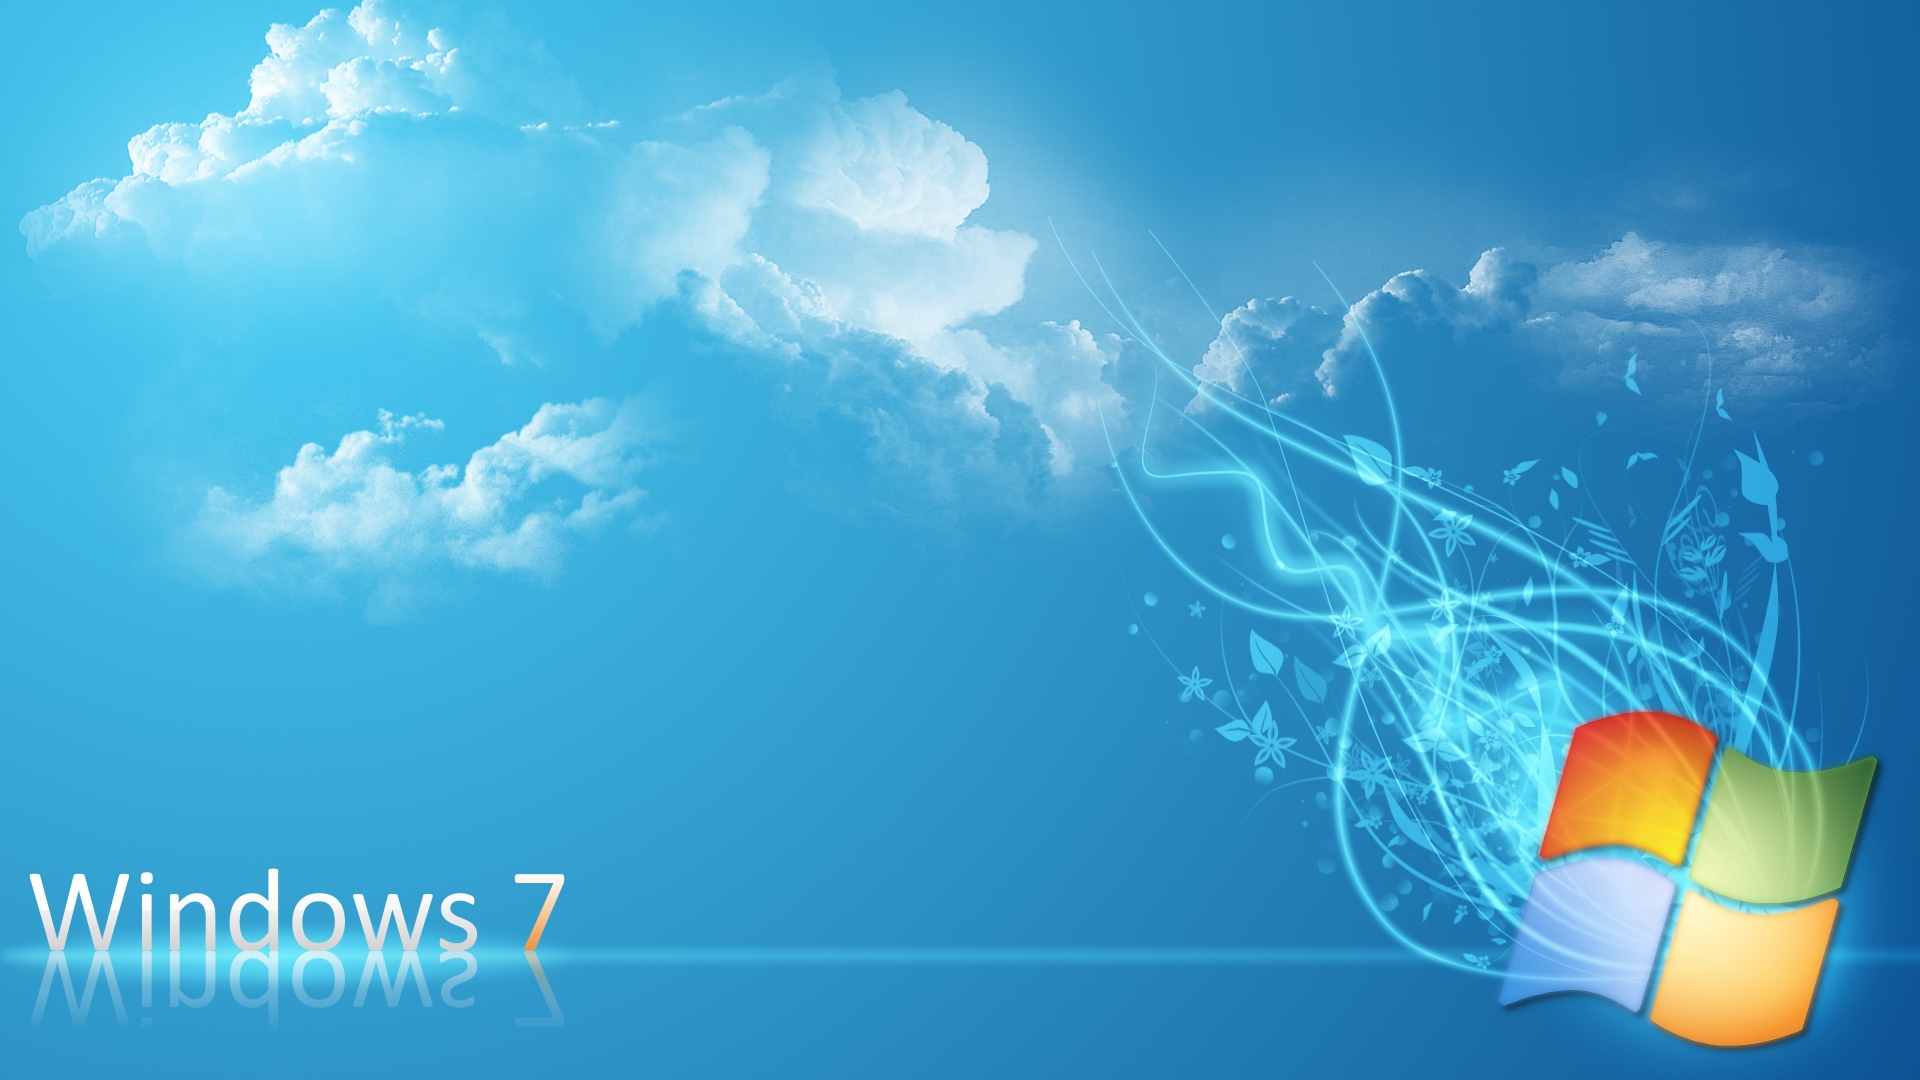 To buy new Windows 7 at great price check this out 1920x1080